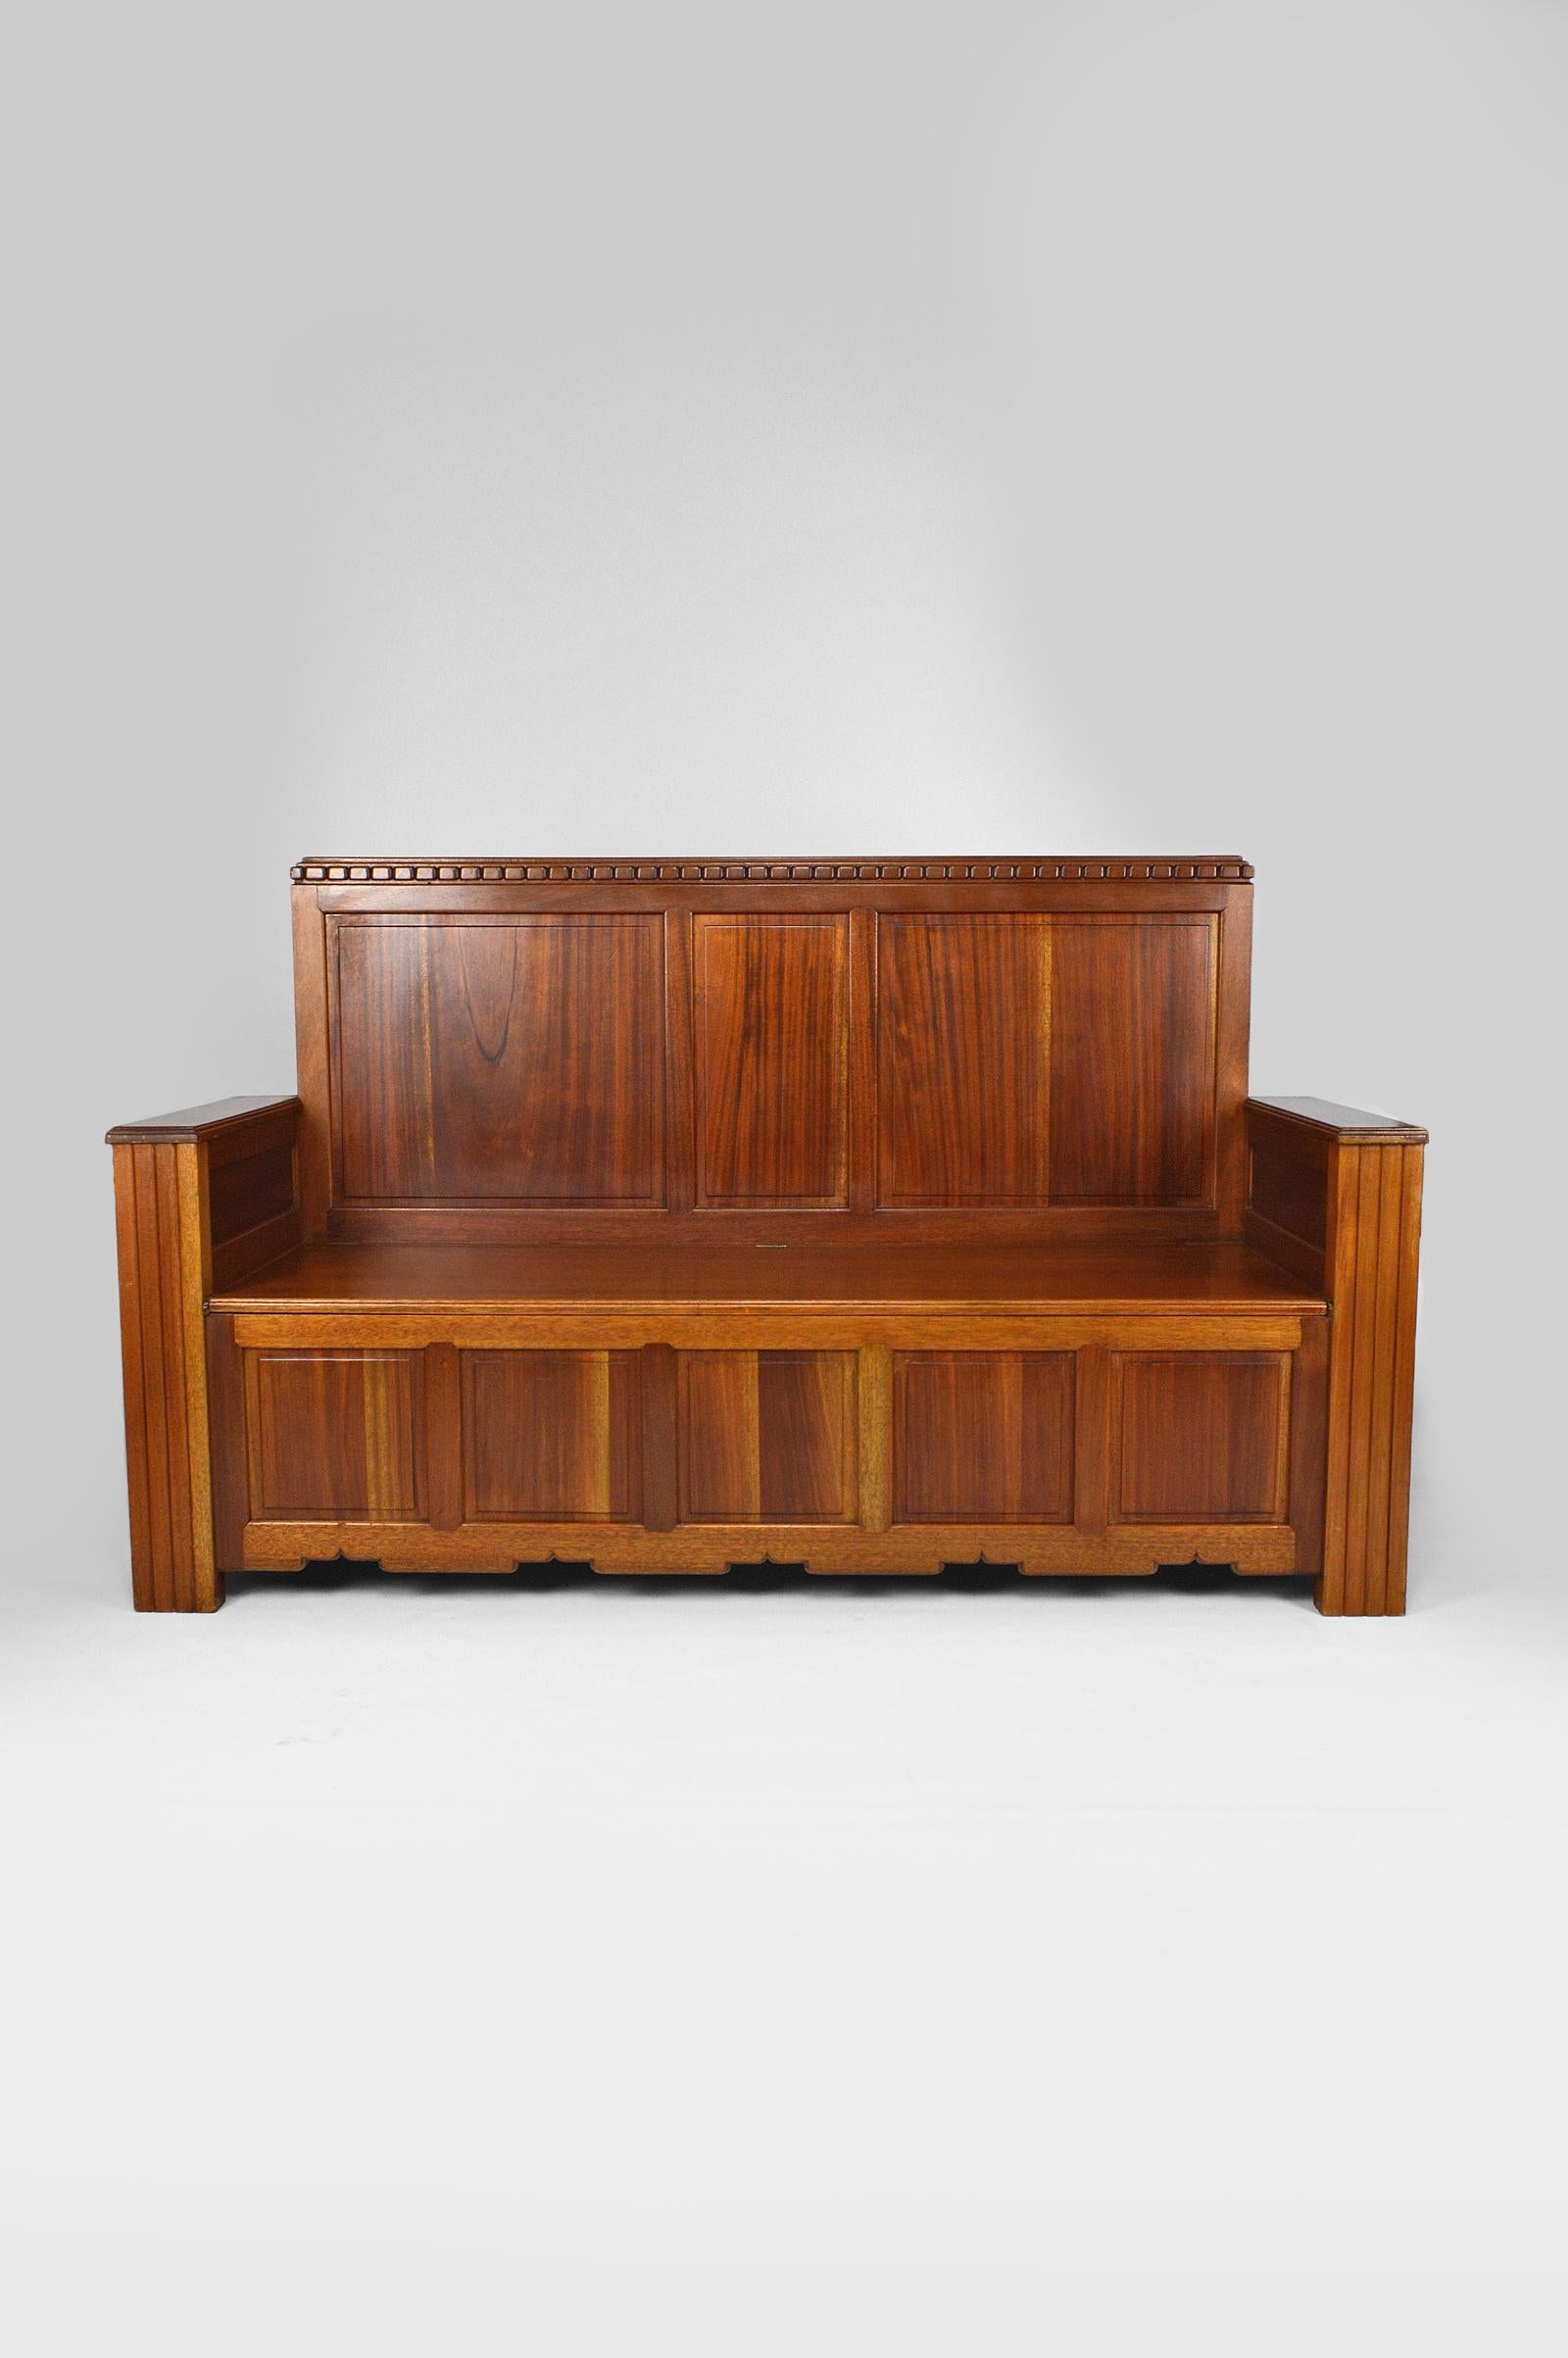 French Art Deco Hall Chest Bench by Clement Goyeneche in Mahogany, France, 1930s For Sale